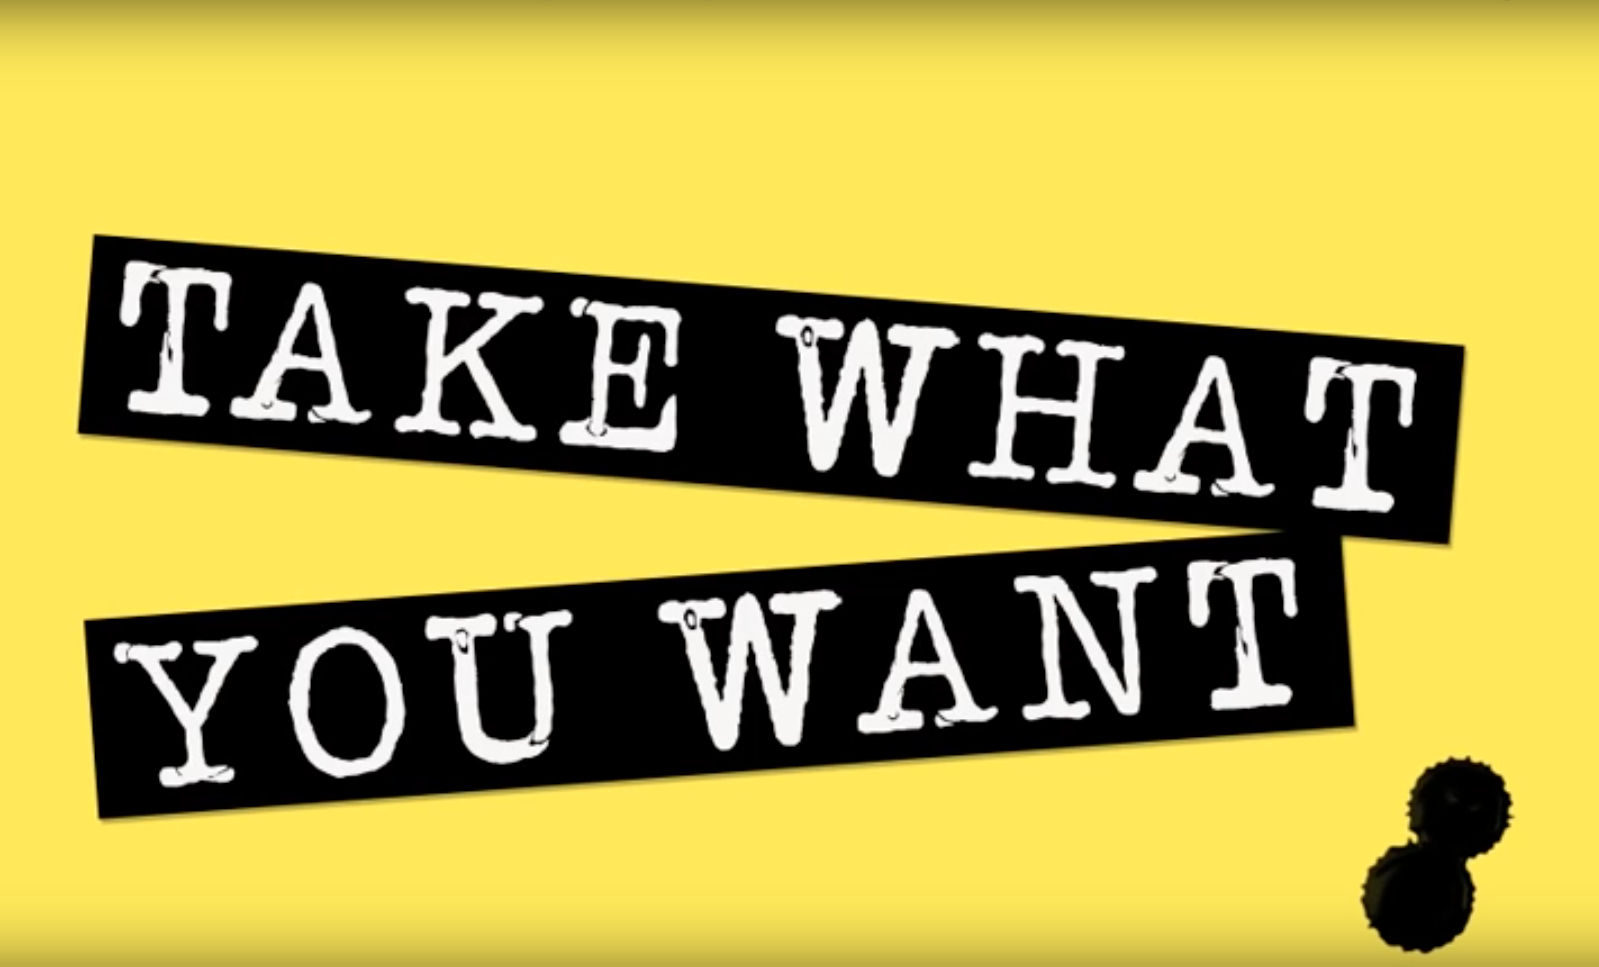 Taking what s not yours текст. One ok Rock take what you want. Take what you want. Take what you want текст.